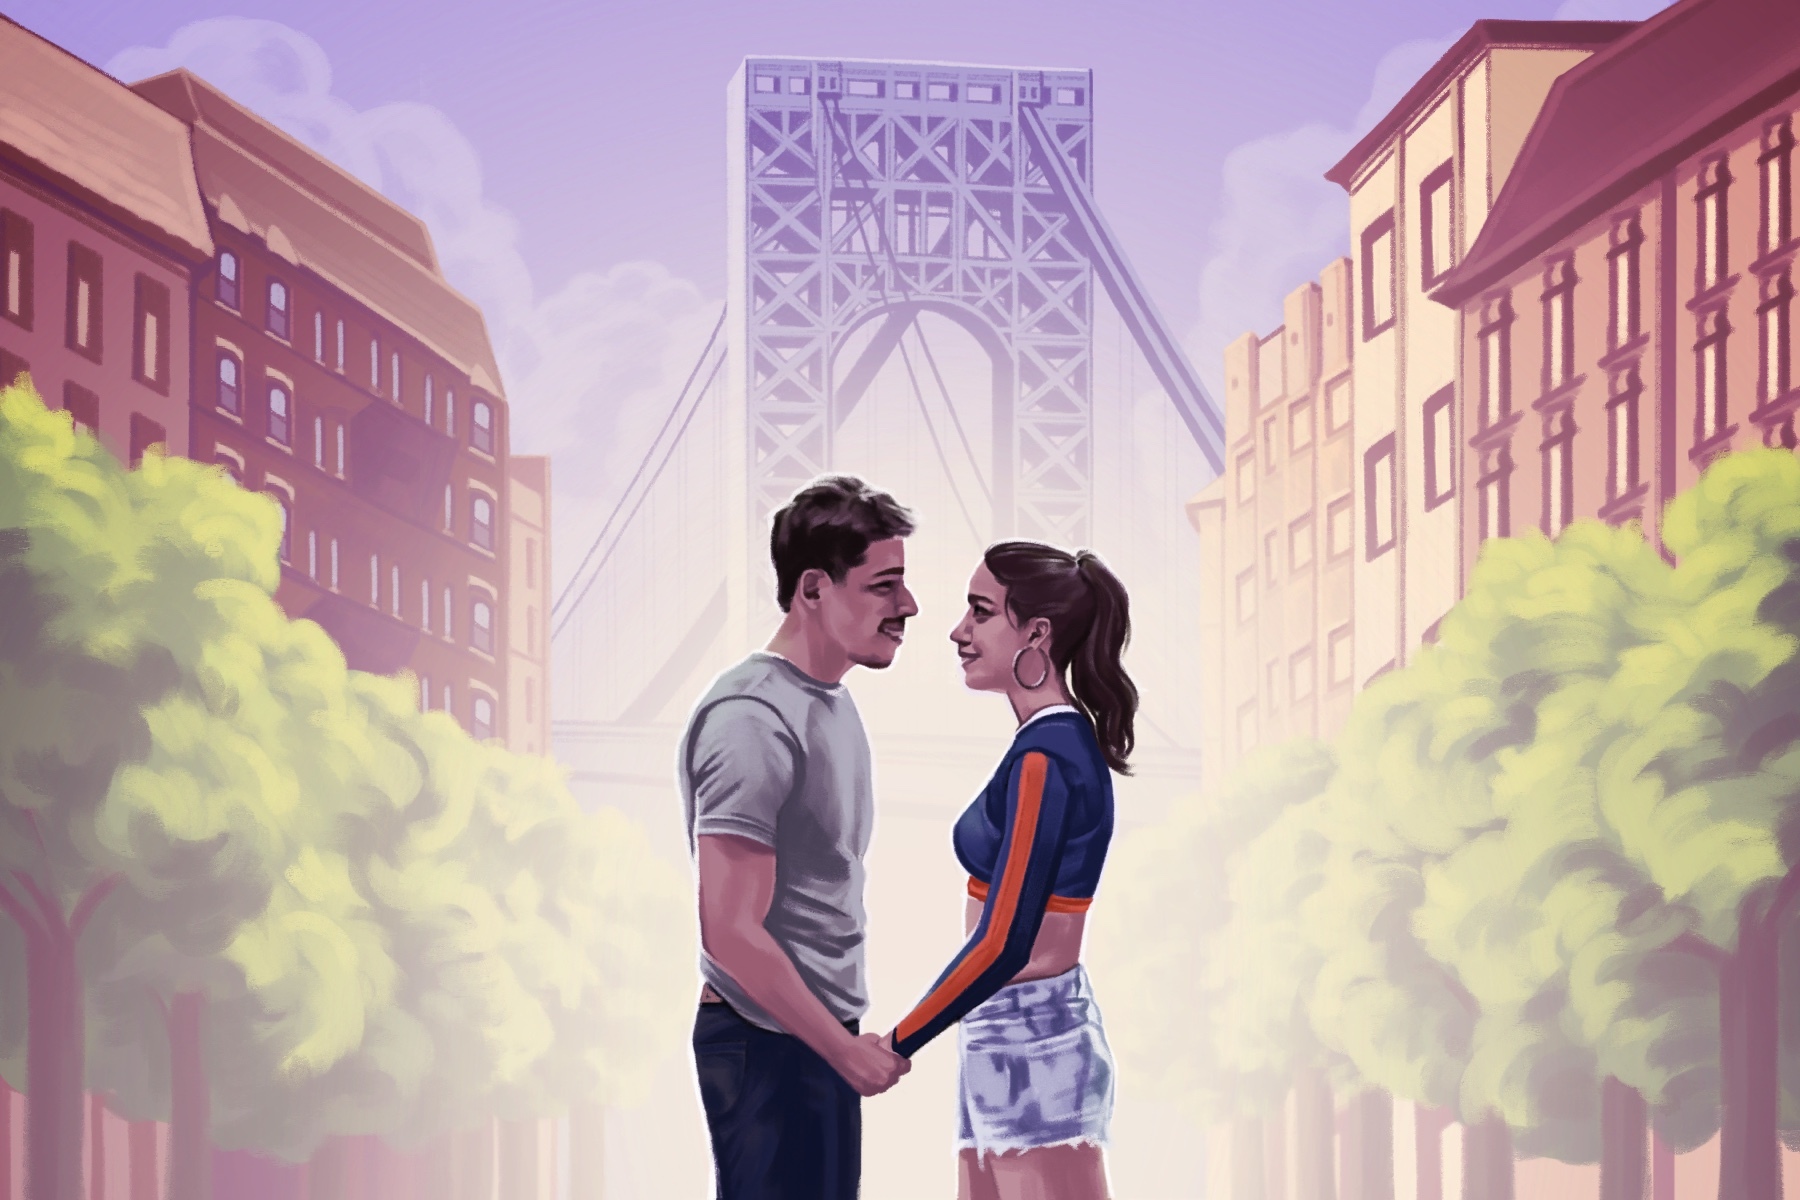 In The Heights illustration of the main characters, Usnavi and Vanessa